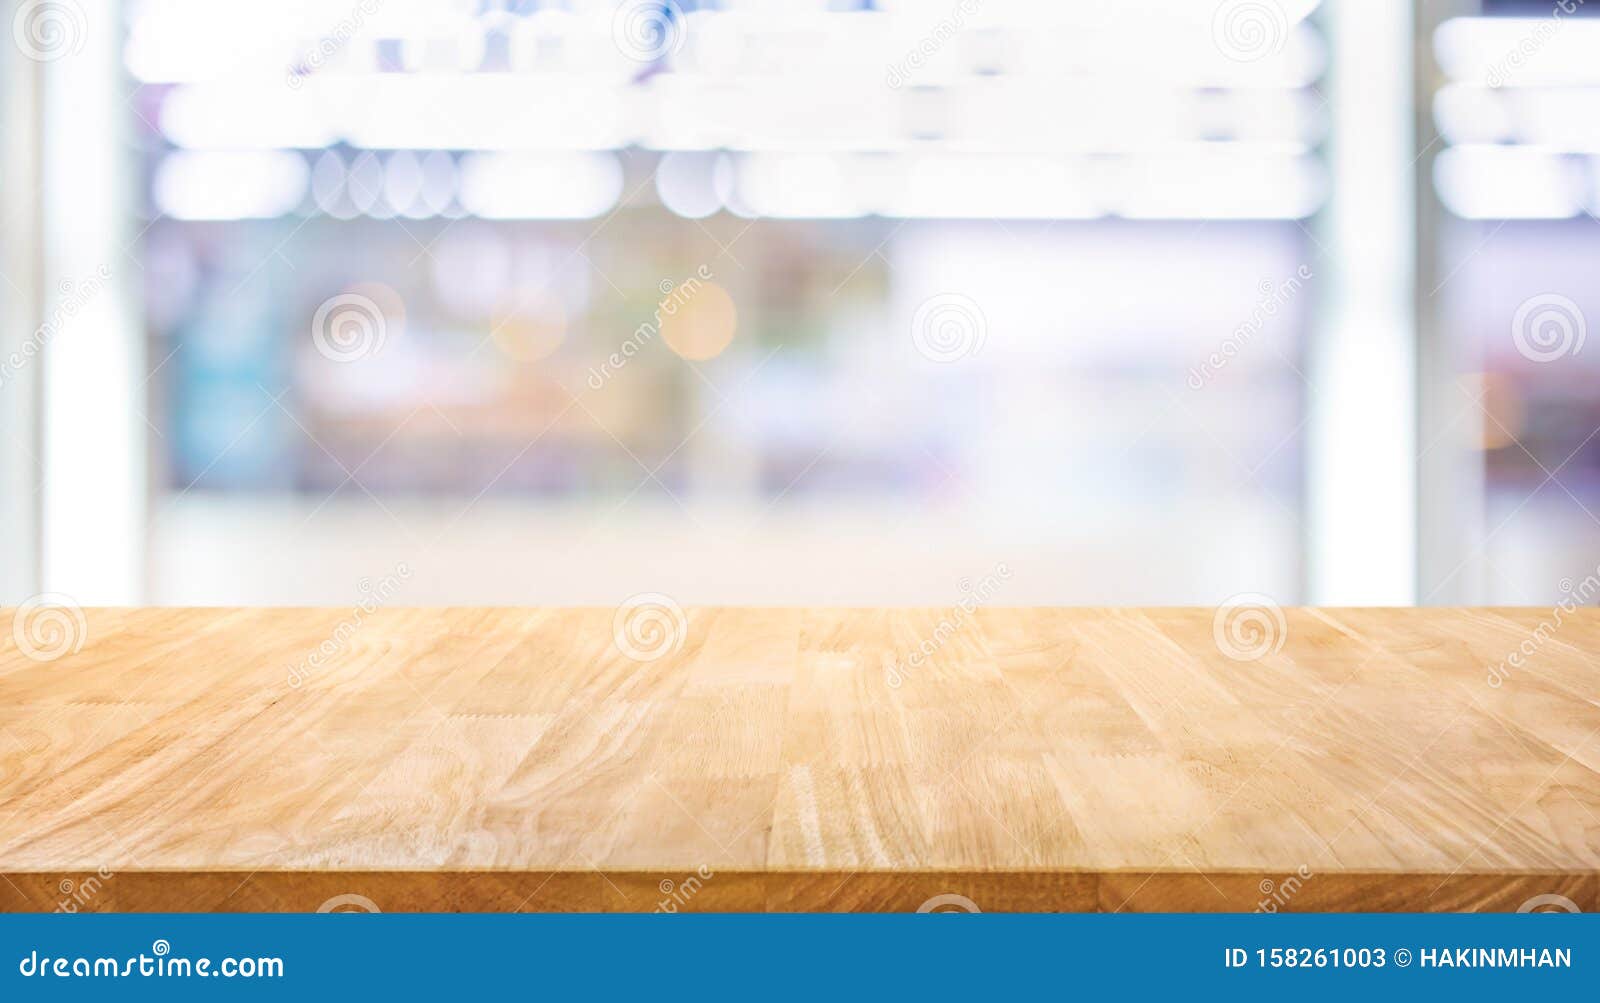 selective focus of wood table top on blur product shelf in supermarket background